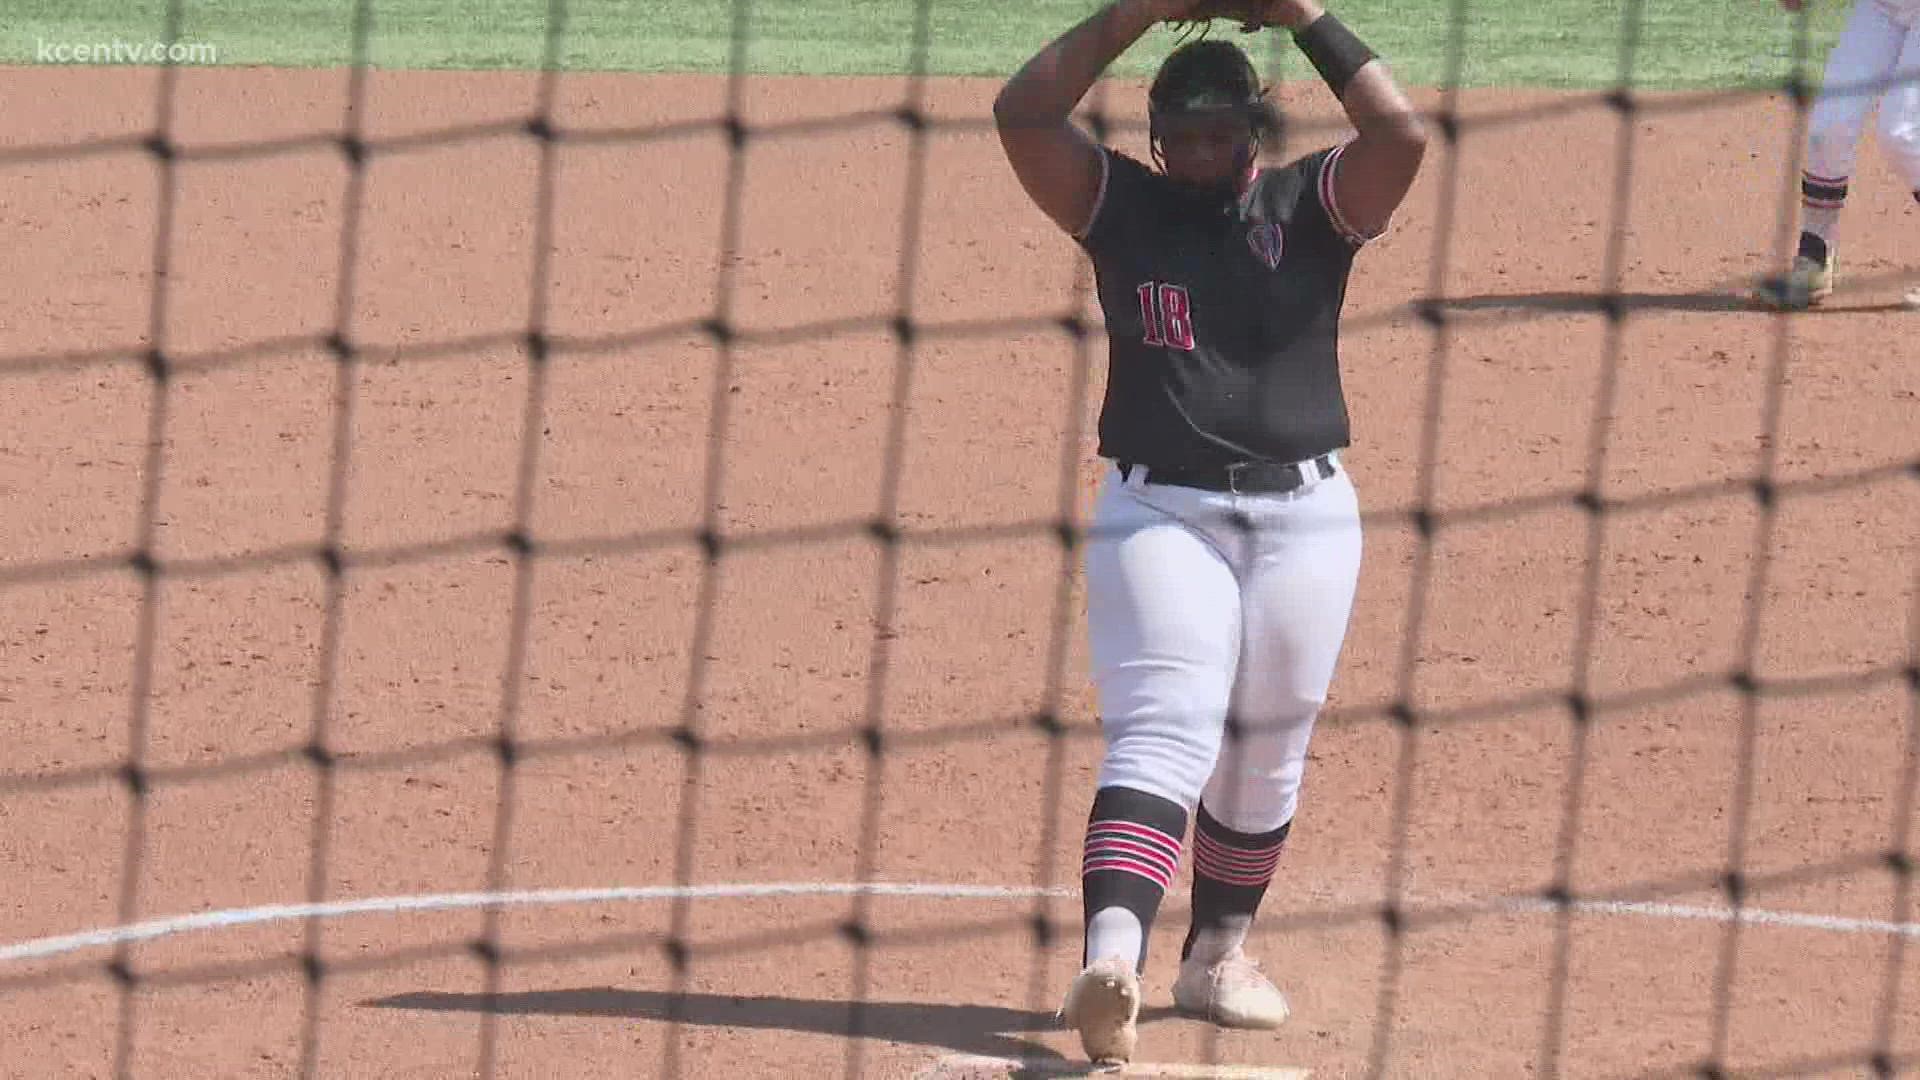 The Harker Heights Knights softball team won an instant classic over Sachse to advance to the regional quarterfinals.